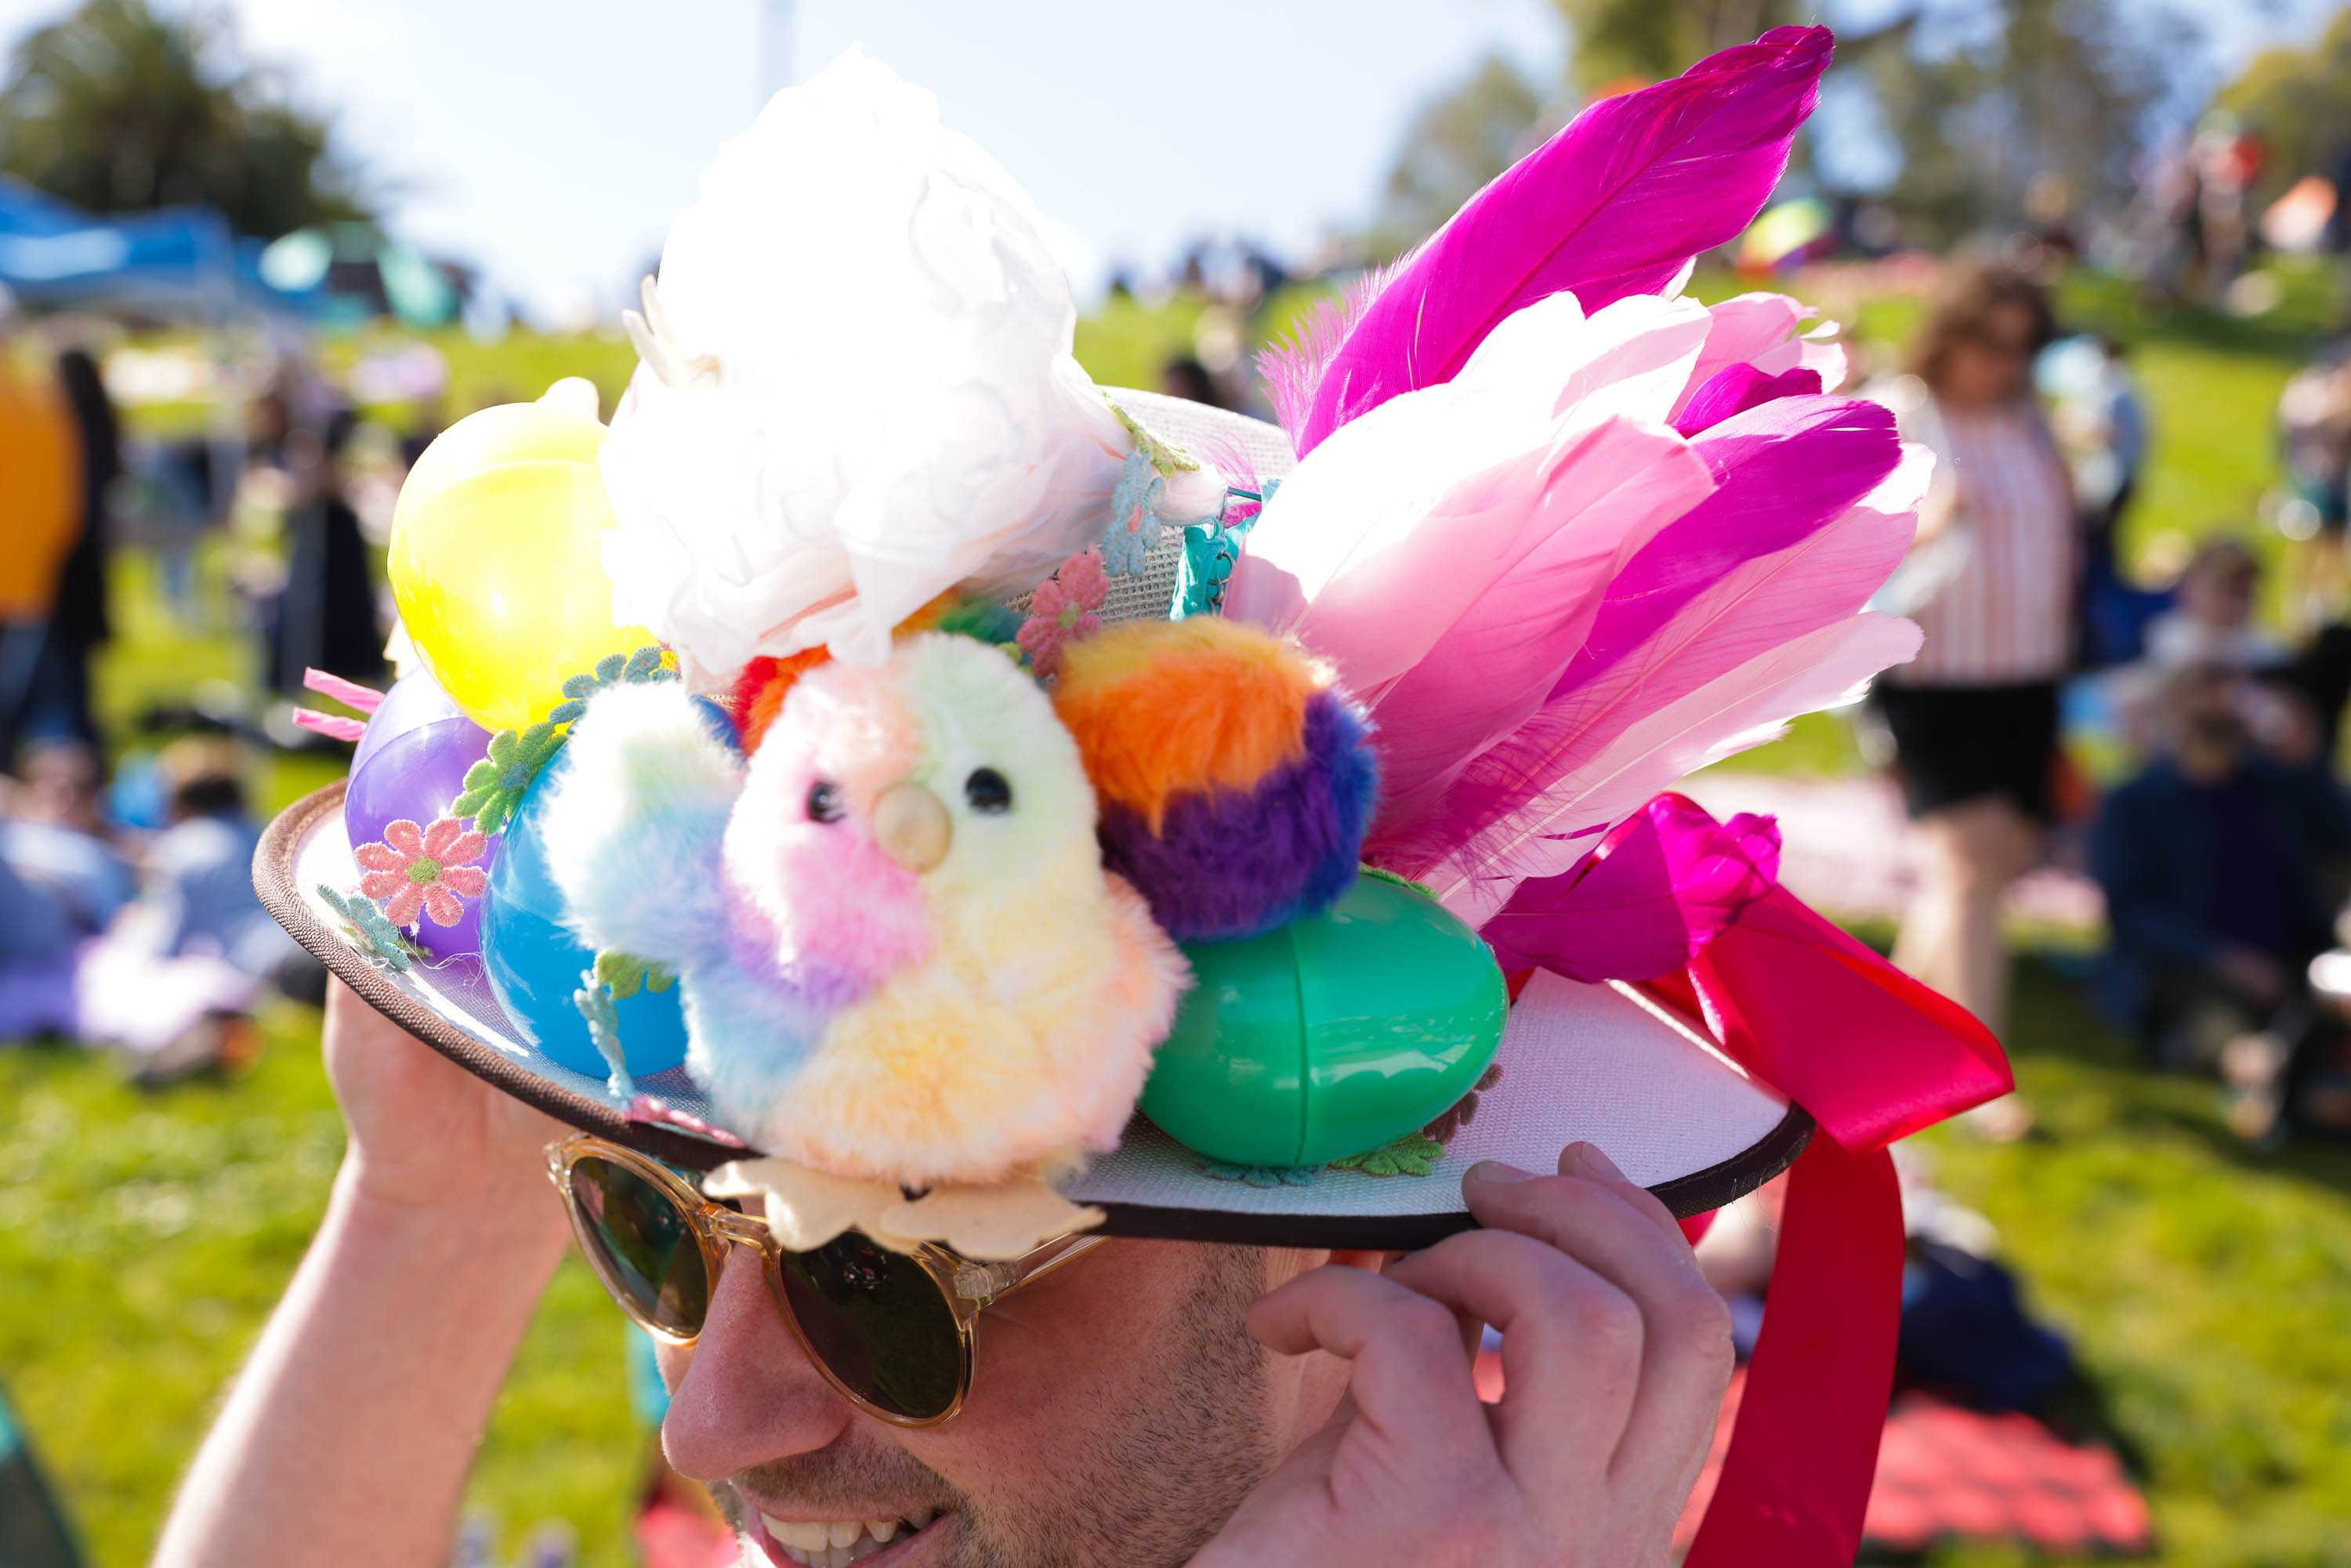 A person wearing a hat adorned with colorful feathers, balloons, and a plush toy, at an outdoor event.